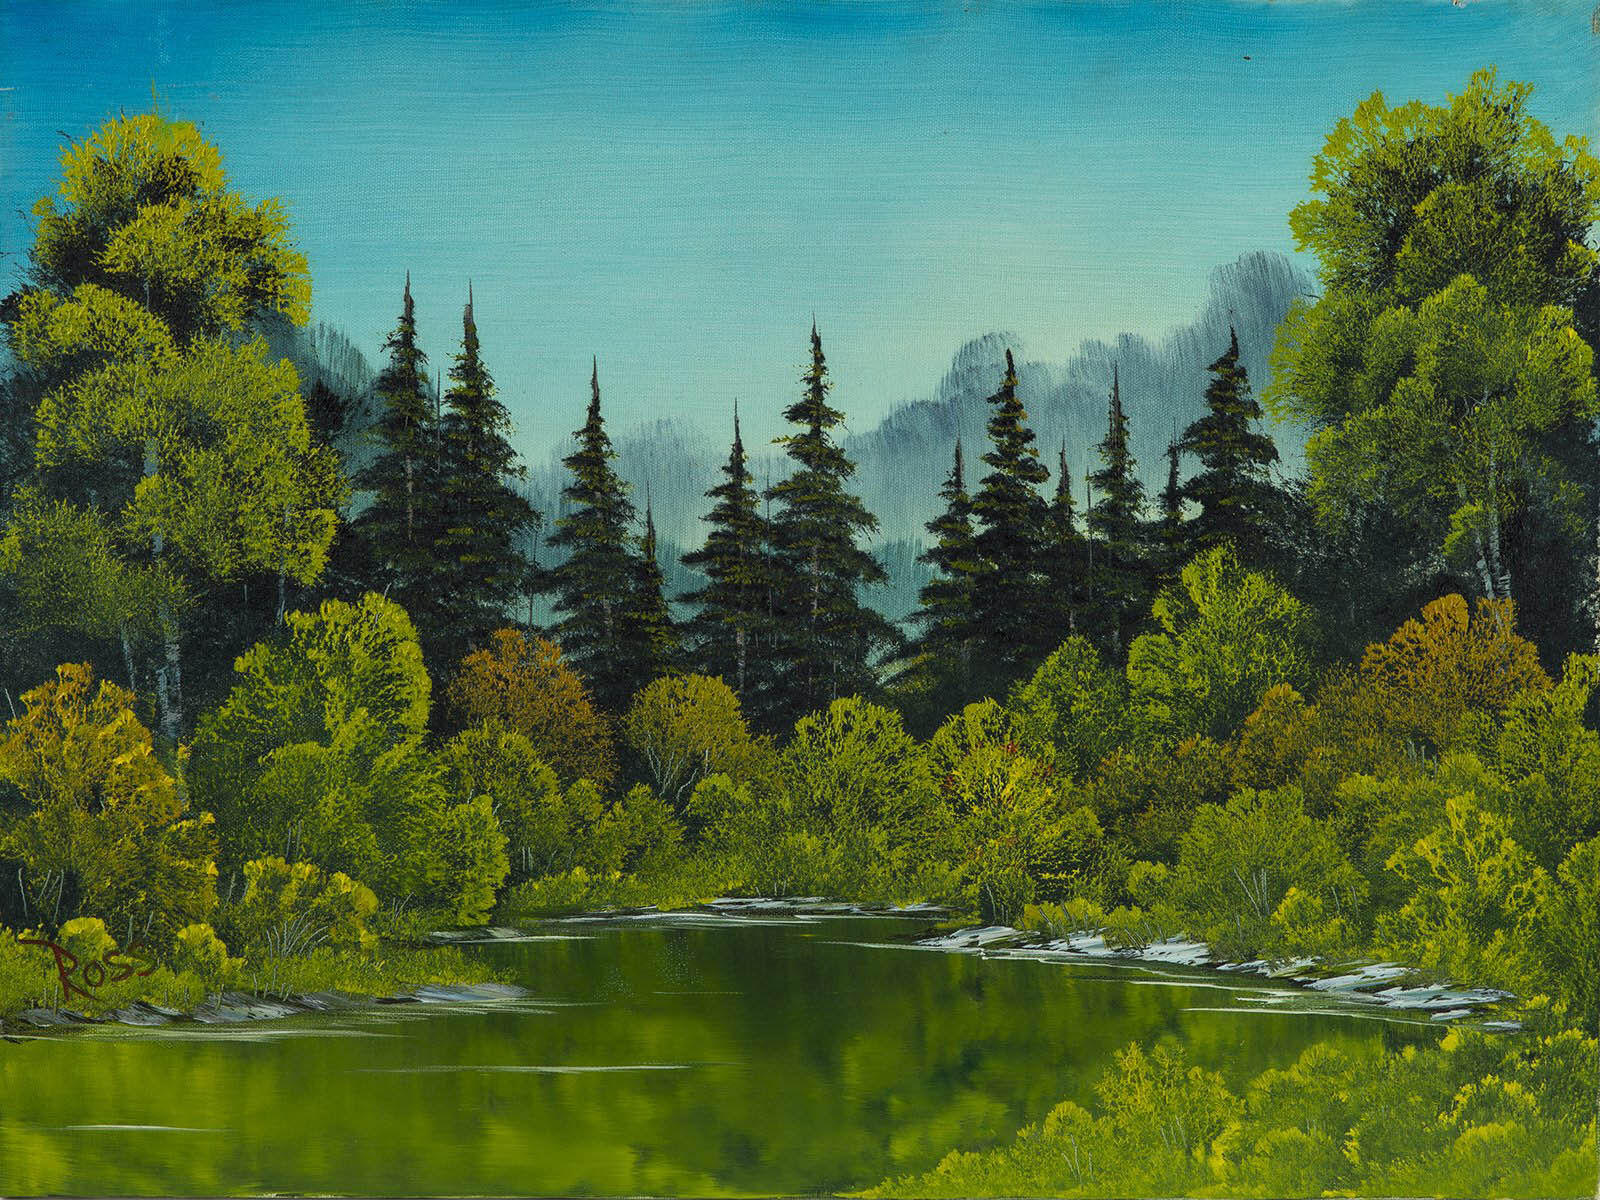 Bob Ross, Meadow Lake, Original Oil Painting, 1982. Image Used with Permission © Modern Artifact.